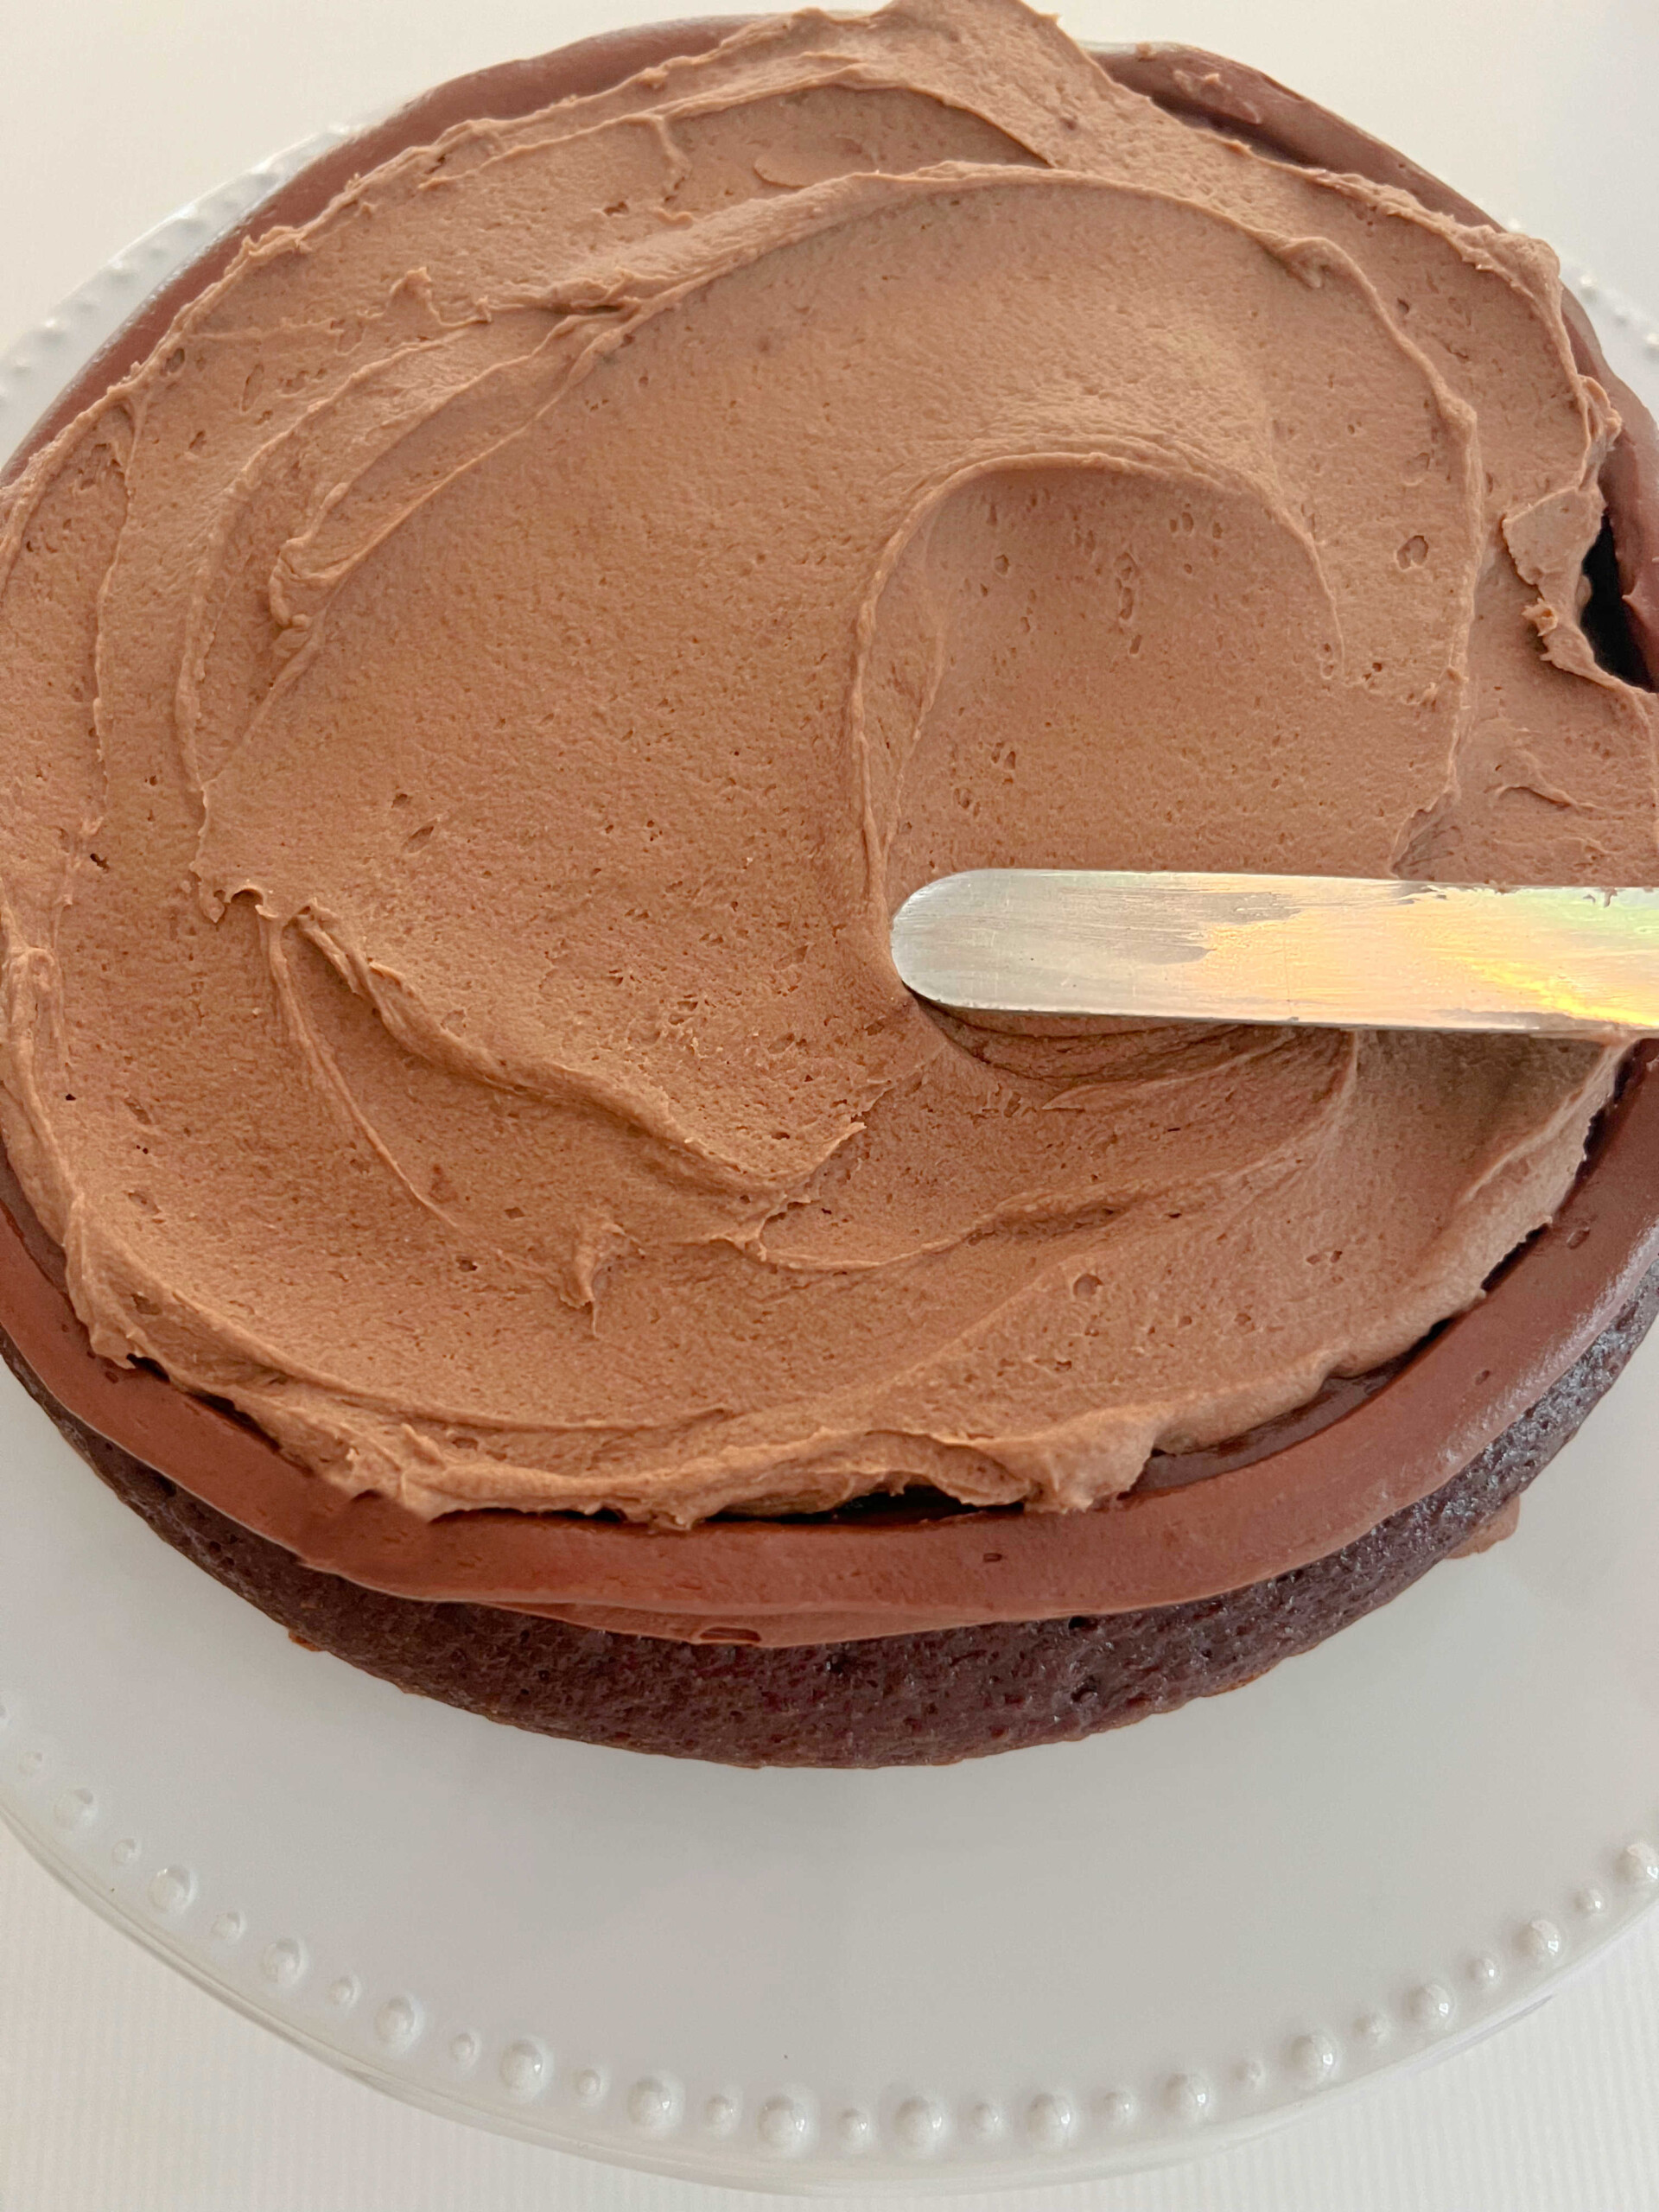 Spreading chocolate mousse filling onto cake layer.